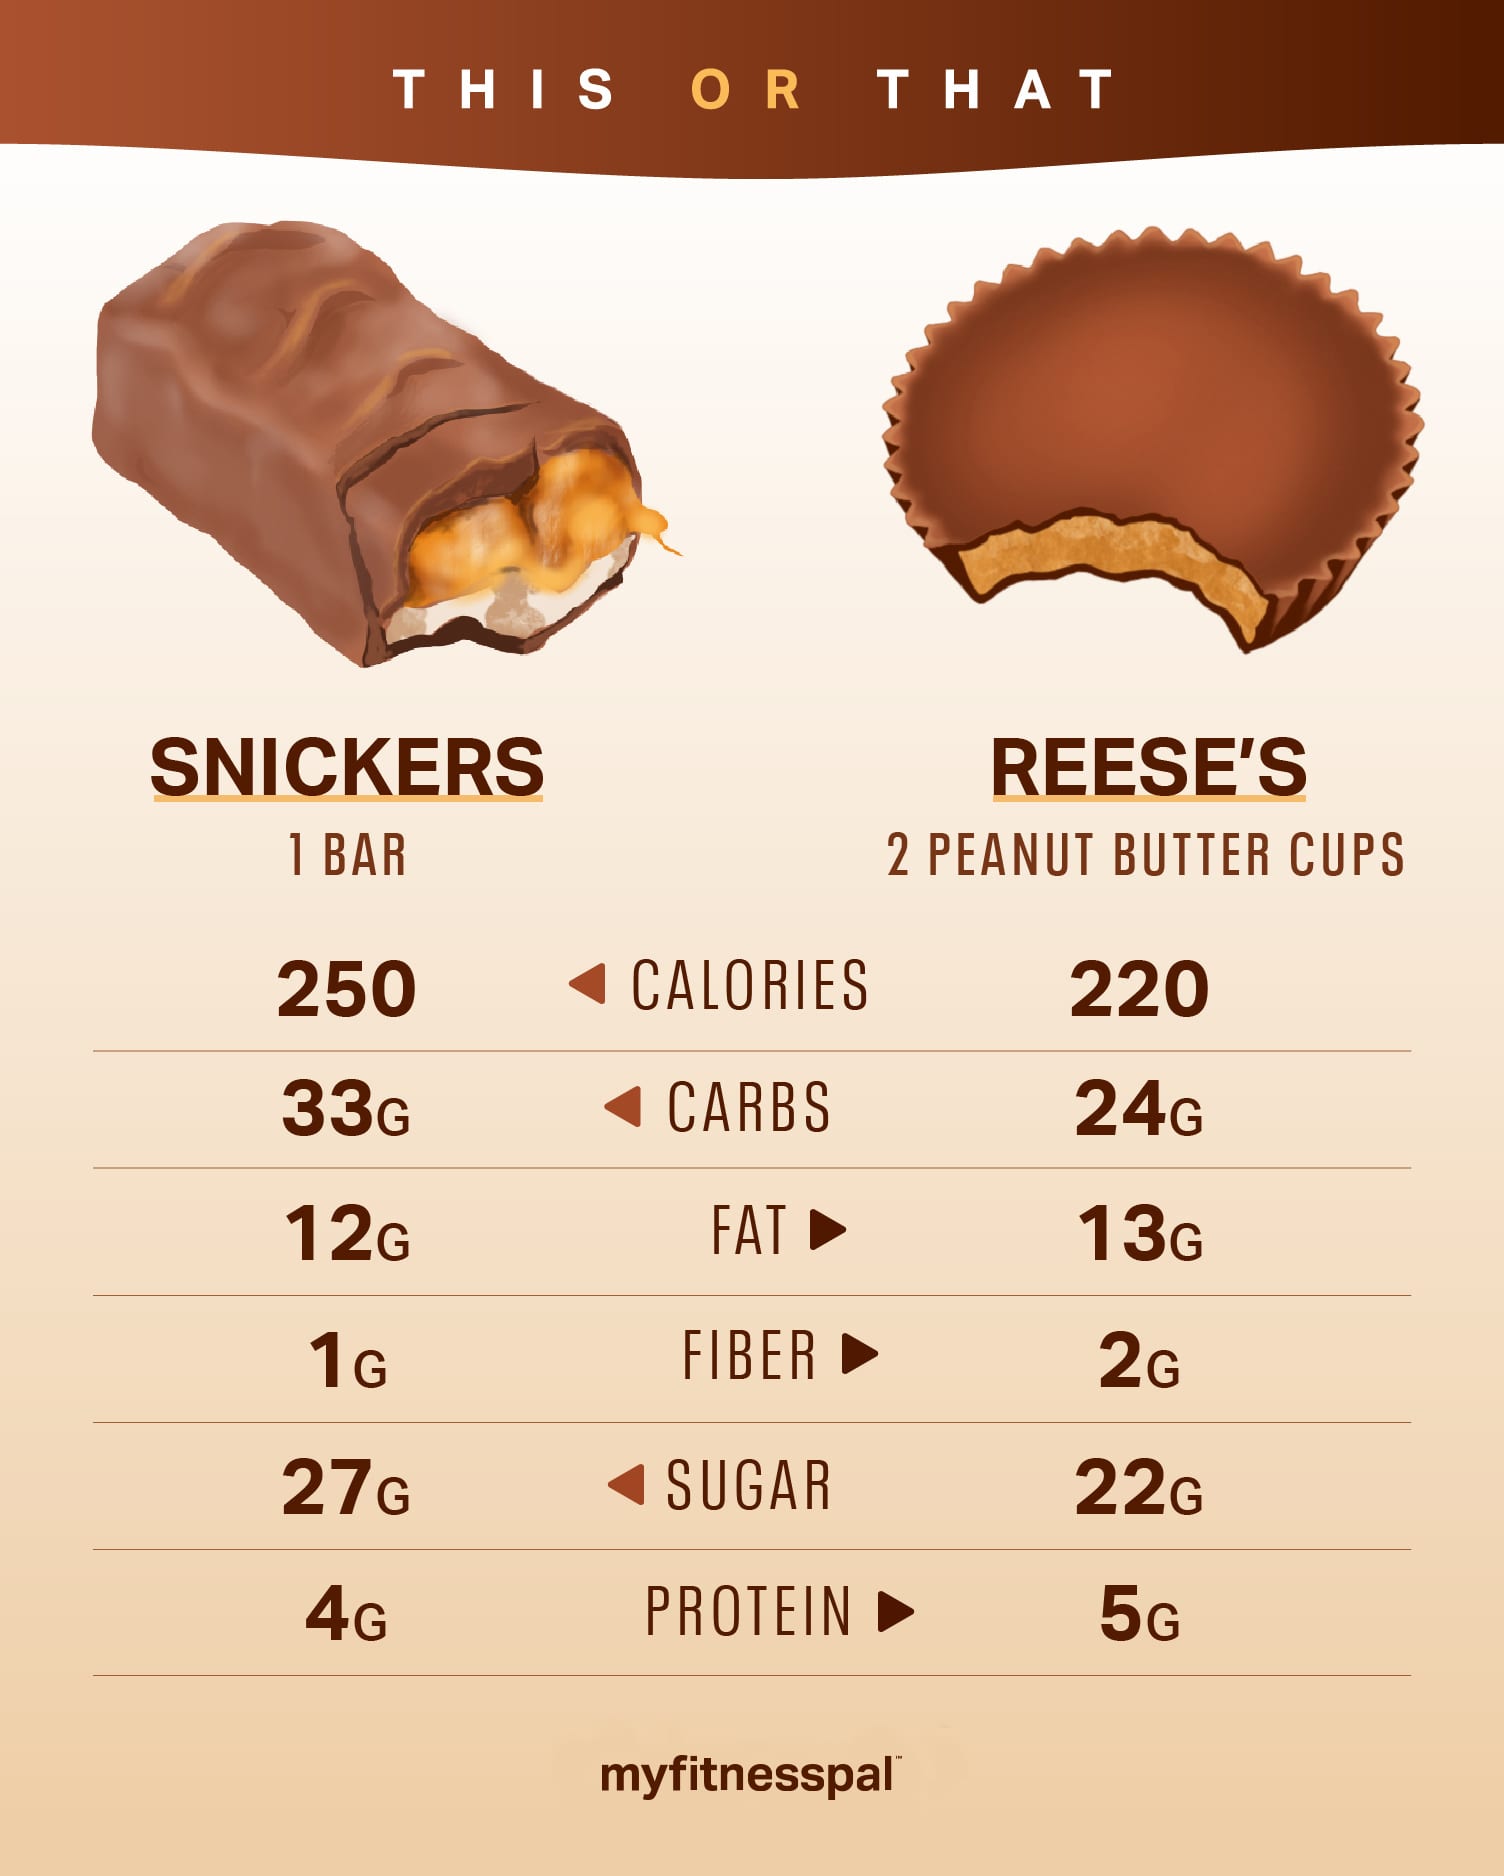 This or That: Is Snickers Healthier Than Reese’s Peanut Butter Cups?